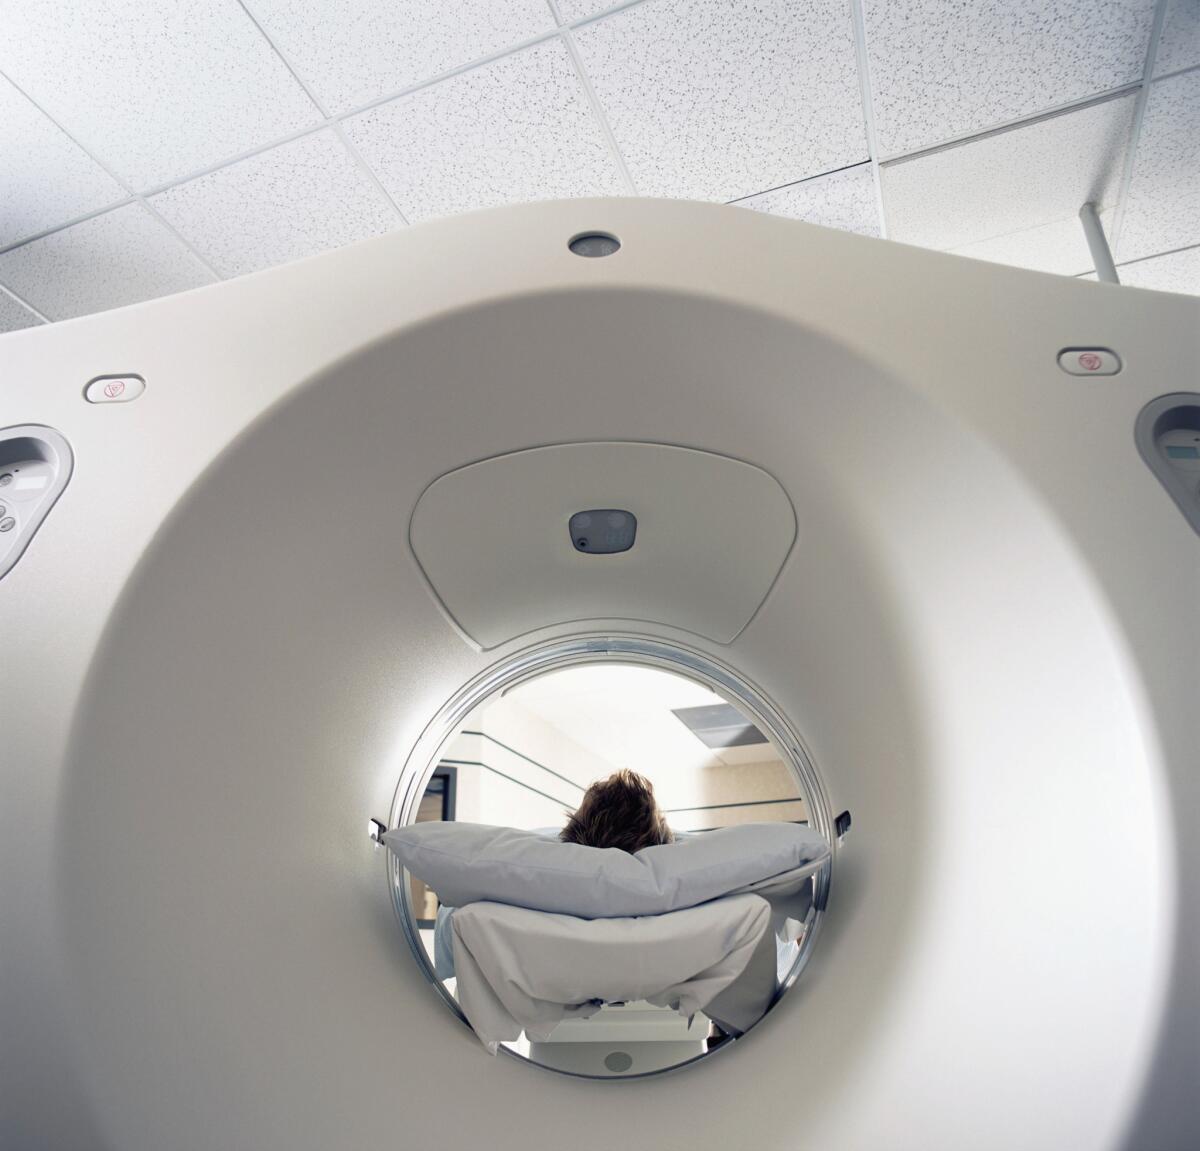 A patient lies in a MRI scanner in this file photo.